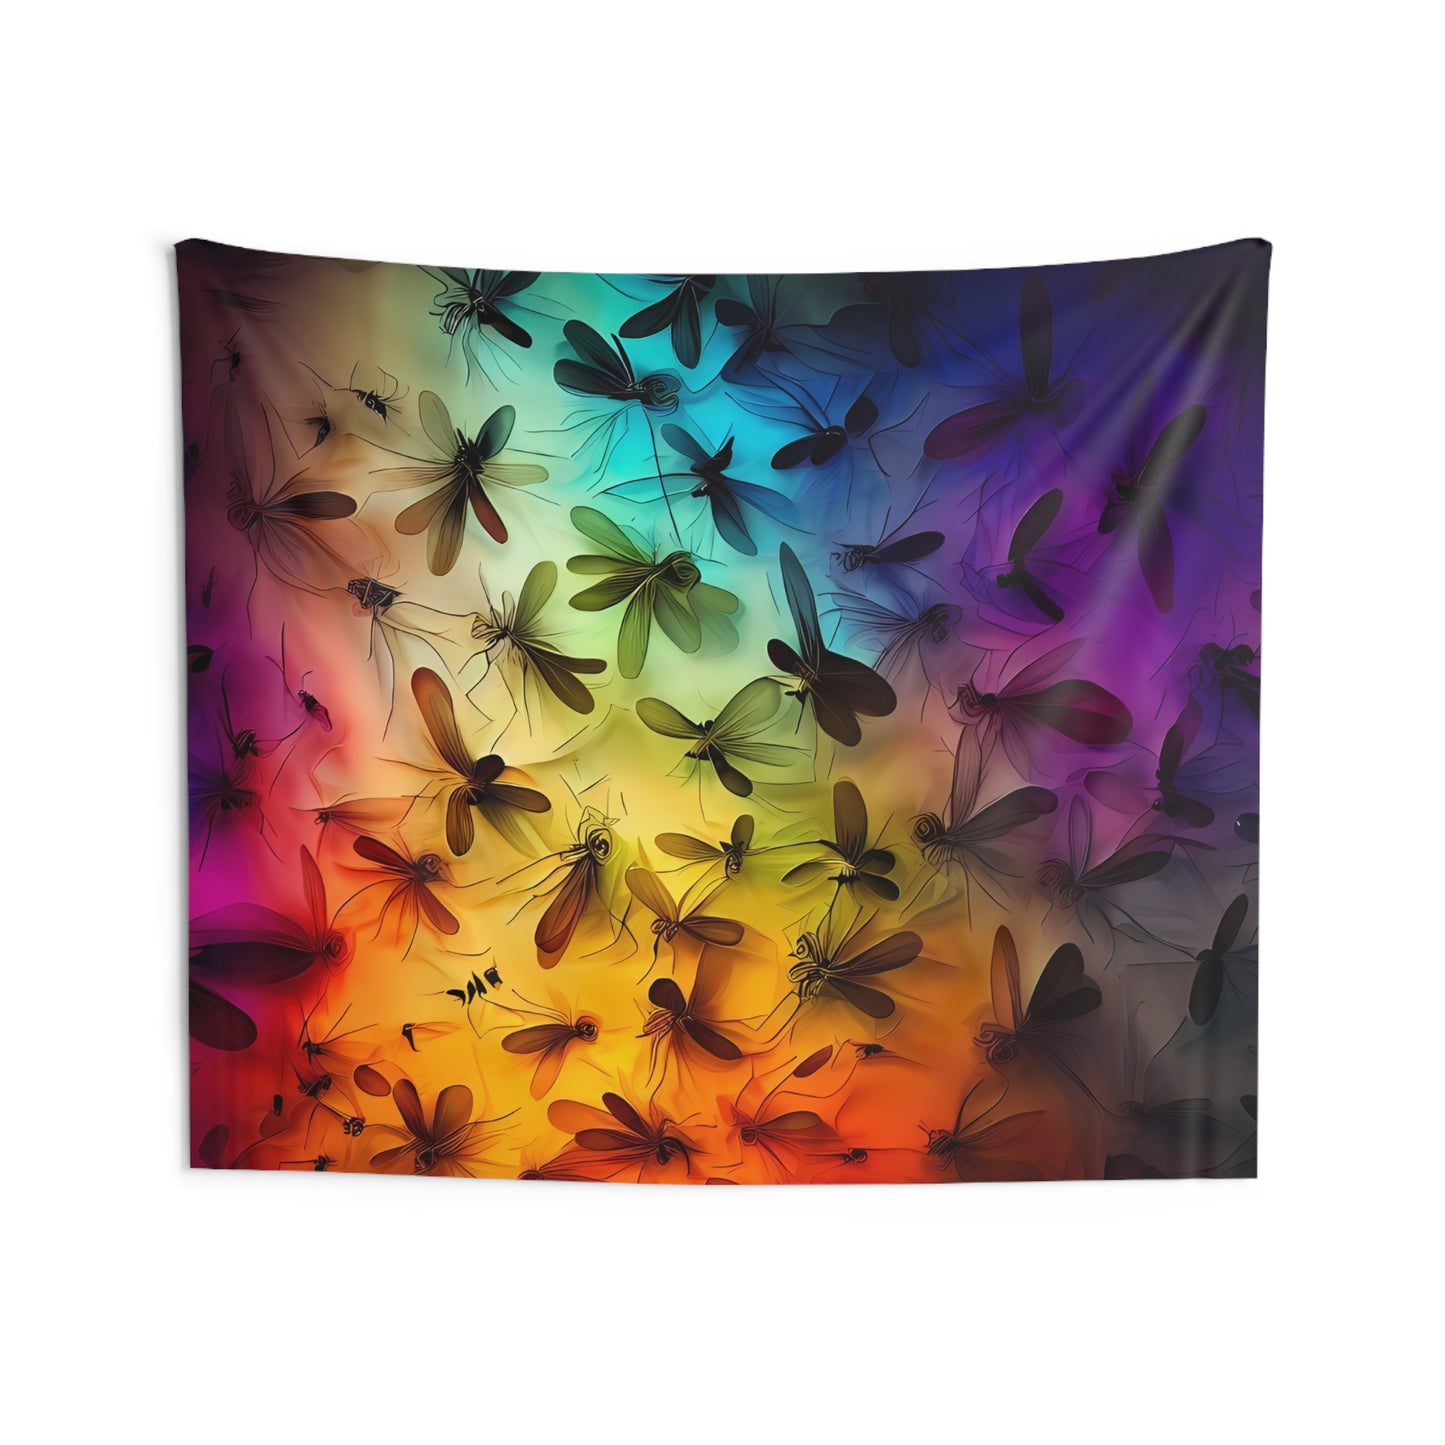 Creative Indoor Wall Art Tapestries - Mosquito  Collage Render - Wall Decoration Gift Items